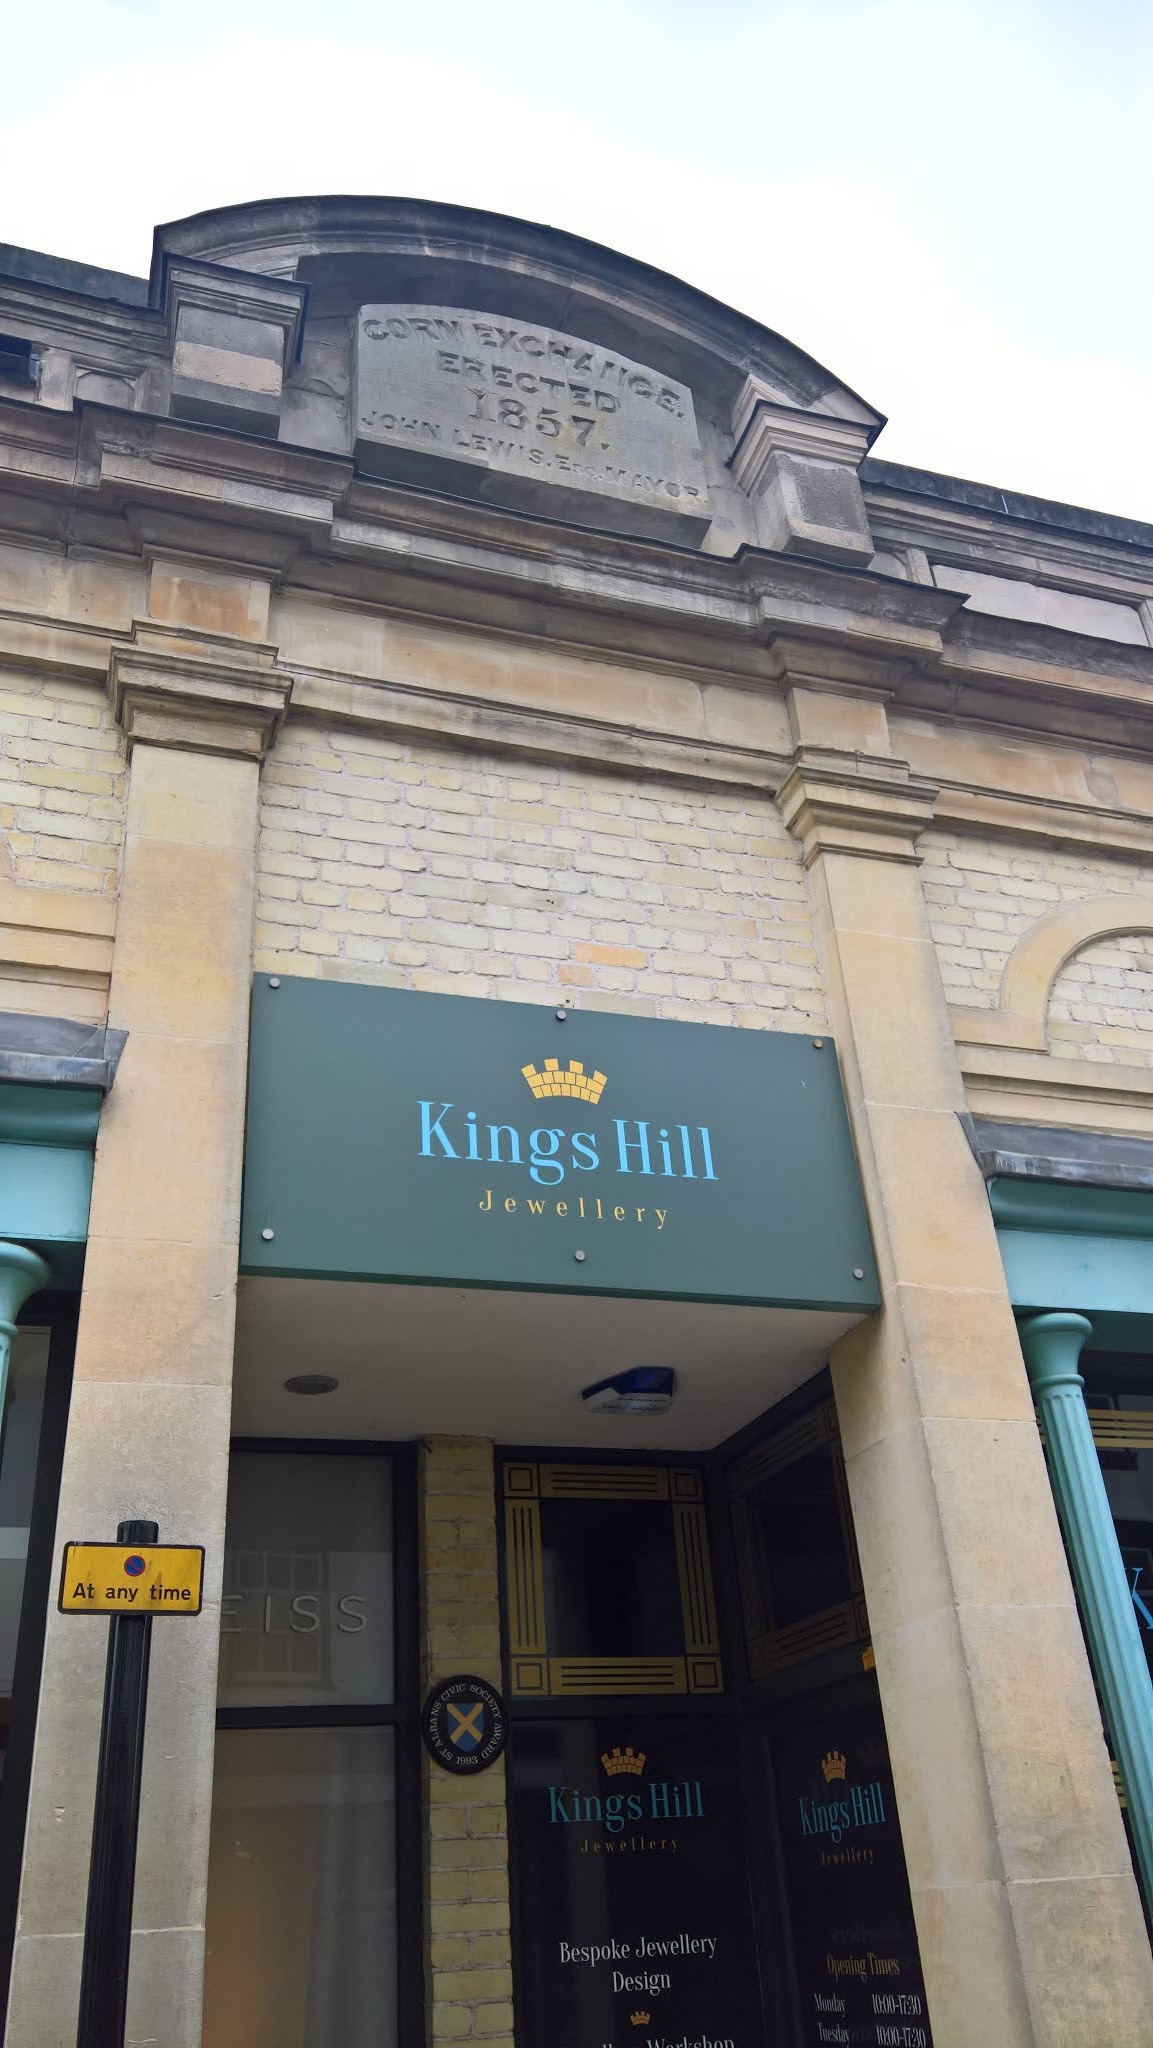 Kings Hill Pawnbrokers 08